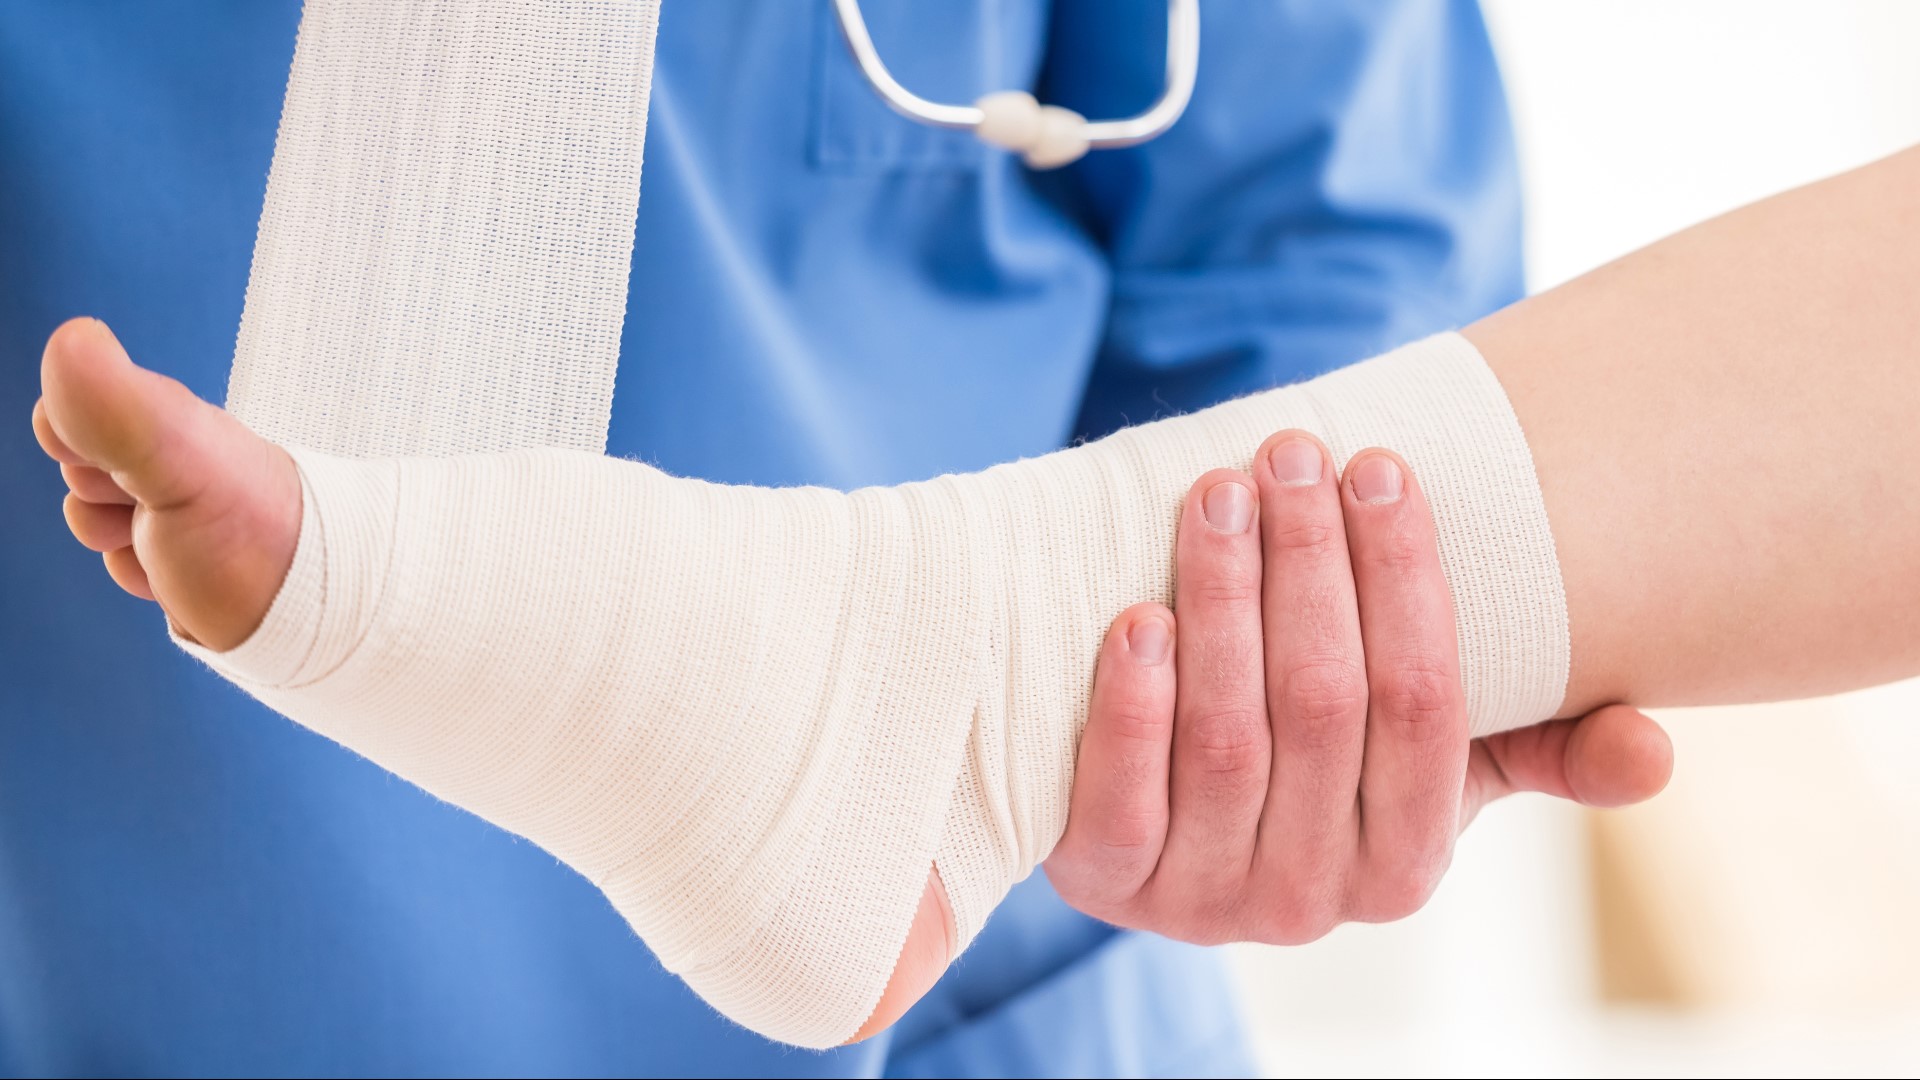 Dr. Amanda Warner discusses common foot injuries and their possible symptoms and treatments”.